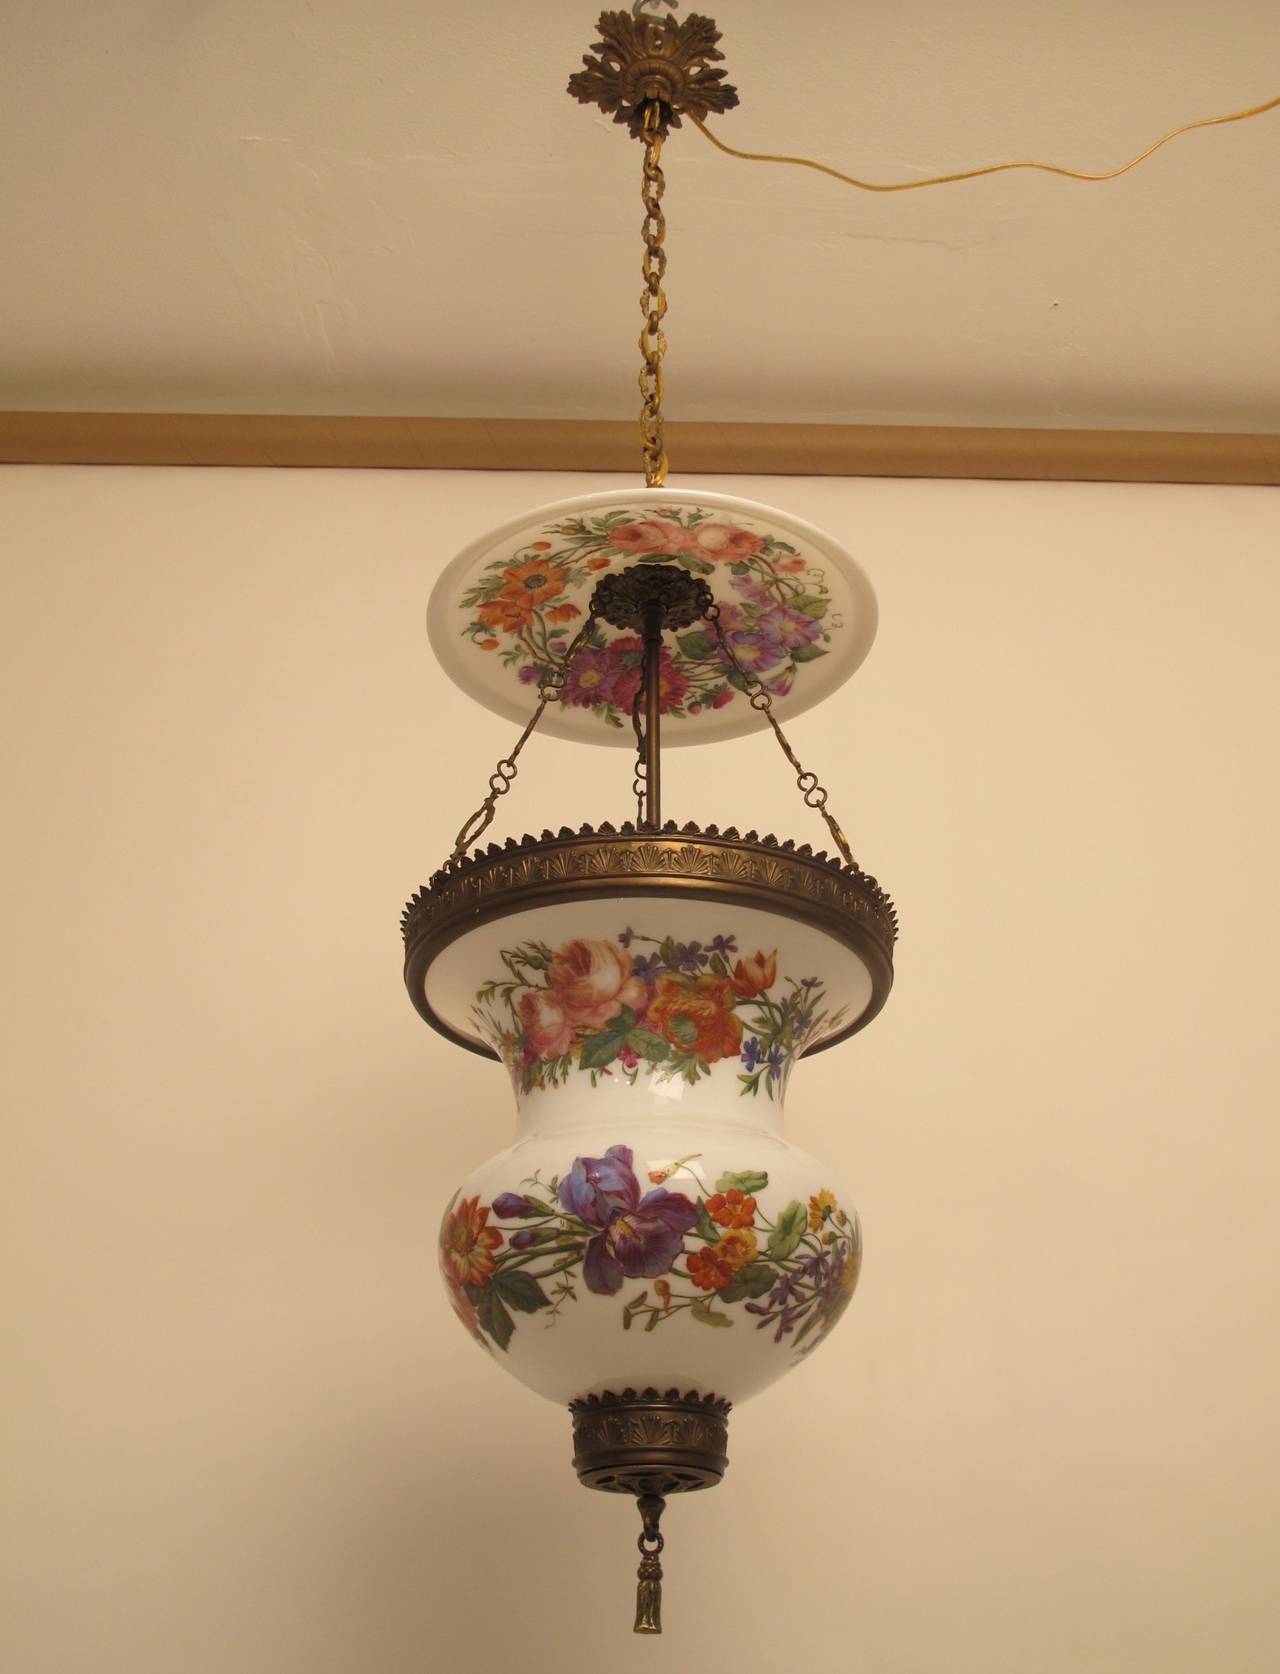 A rare and unusual large scale hurricane candle light lamp with exquisitely hand painted floral decoration. Wonderful original condition and with original canopy. Newly wired for electricity, holding a single standard size light bulb. American, mid